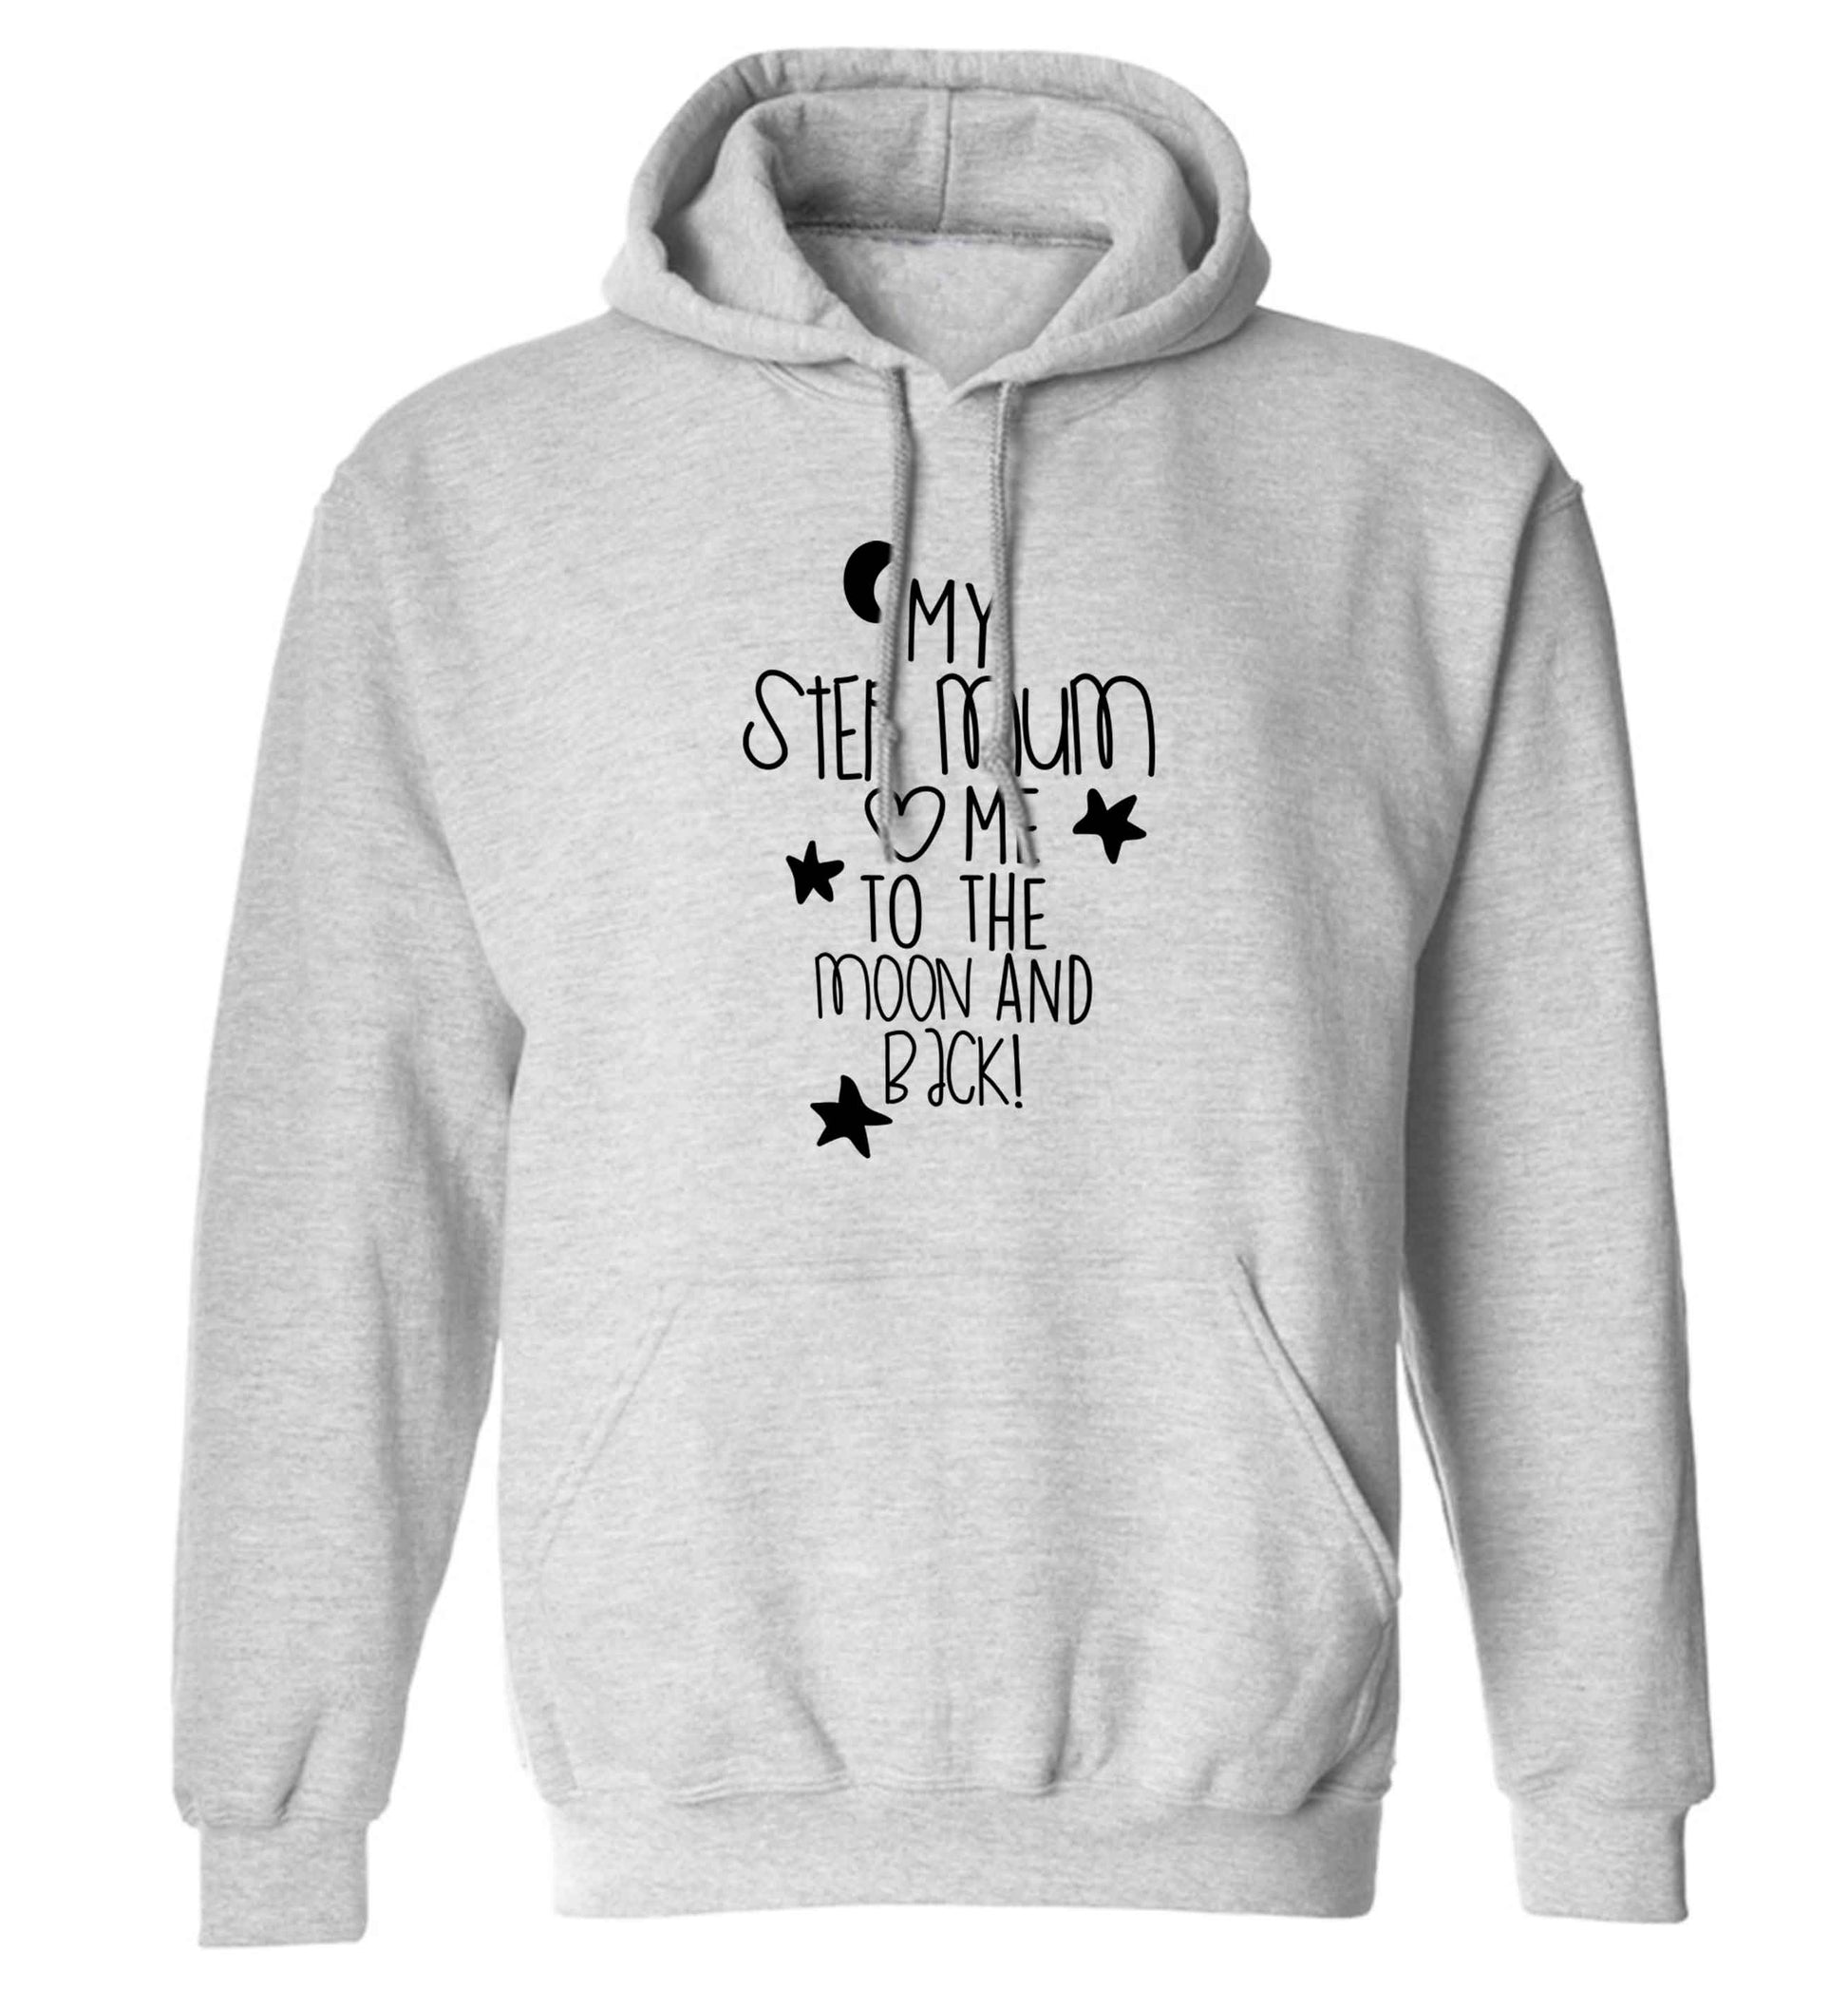 My step-mum loves me to the moon and back adults unisex grey hoodie 2XL